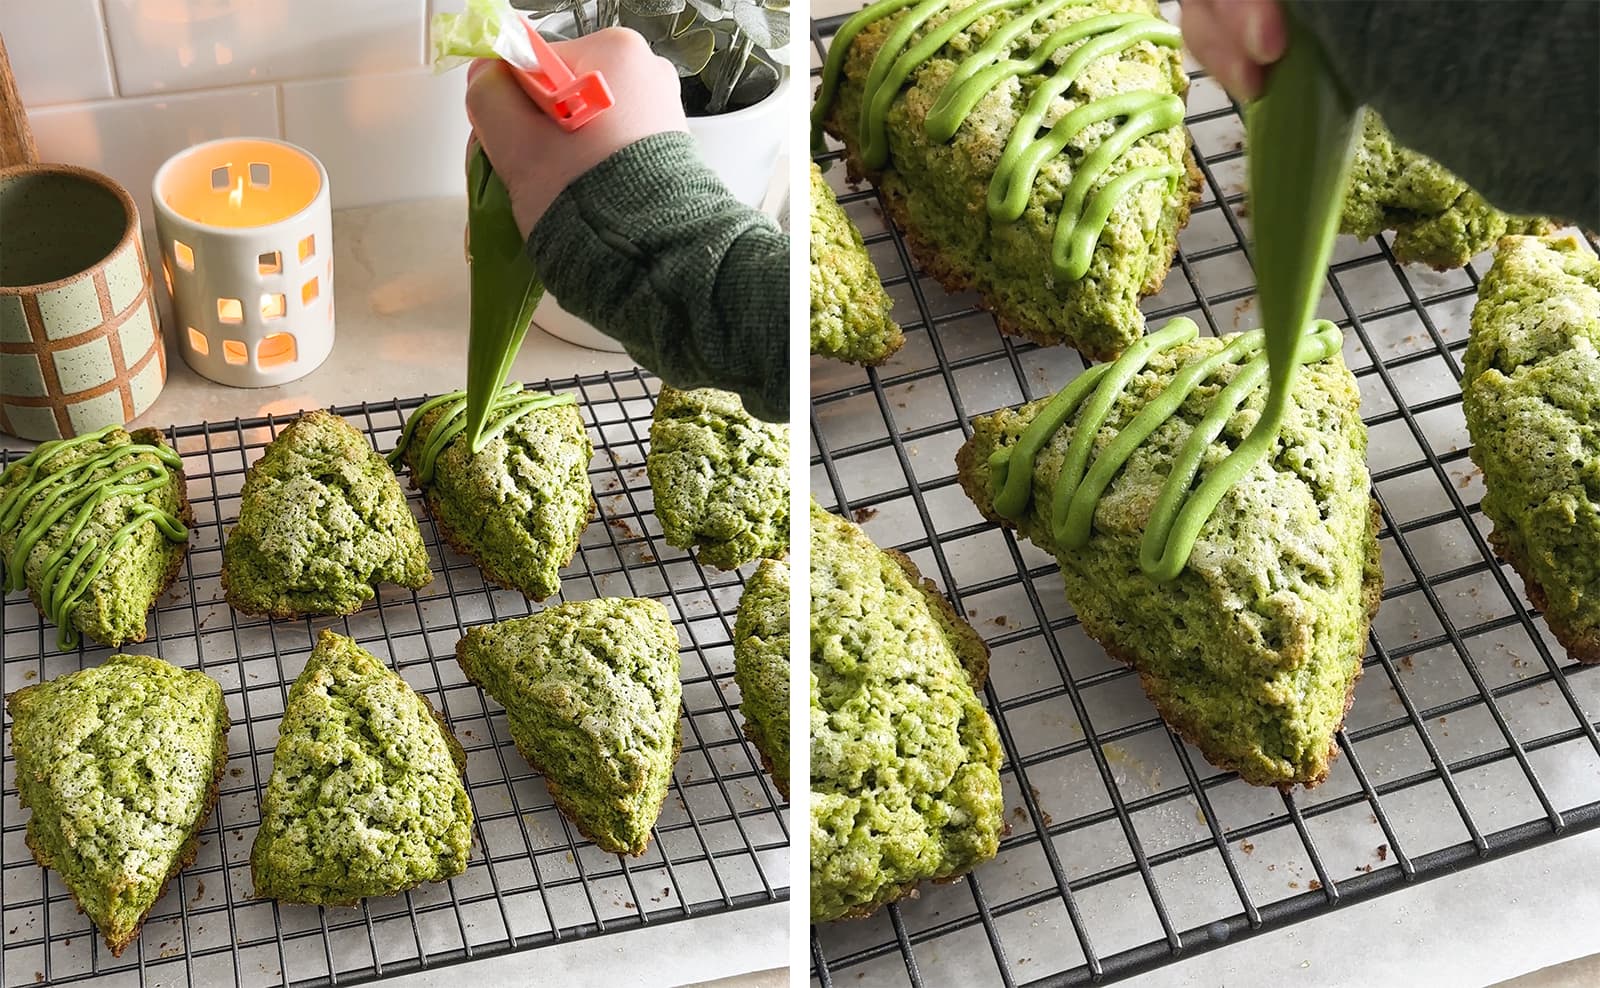 Left to right: piping icing on top of a wire rack full of matcha scones, close-up of piping a drizzle of icing on top of a baked scone.